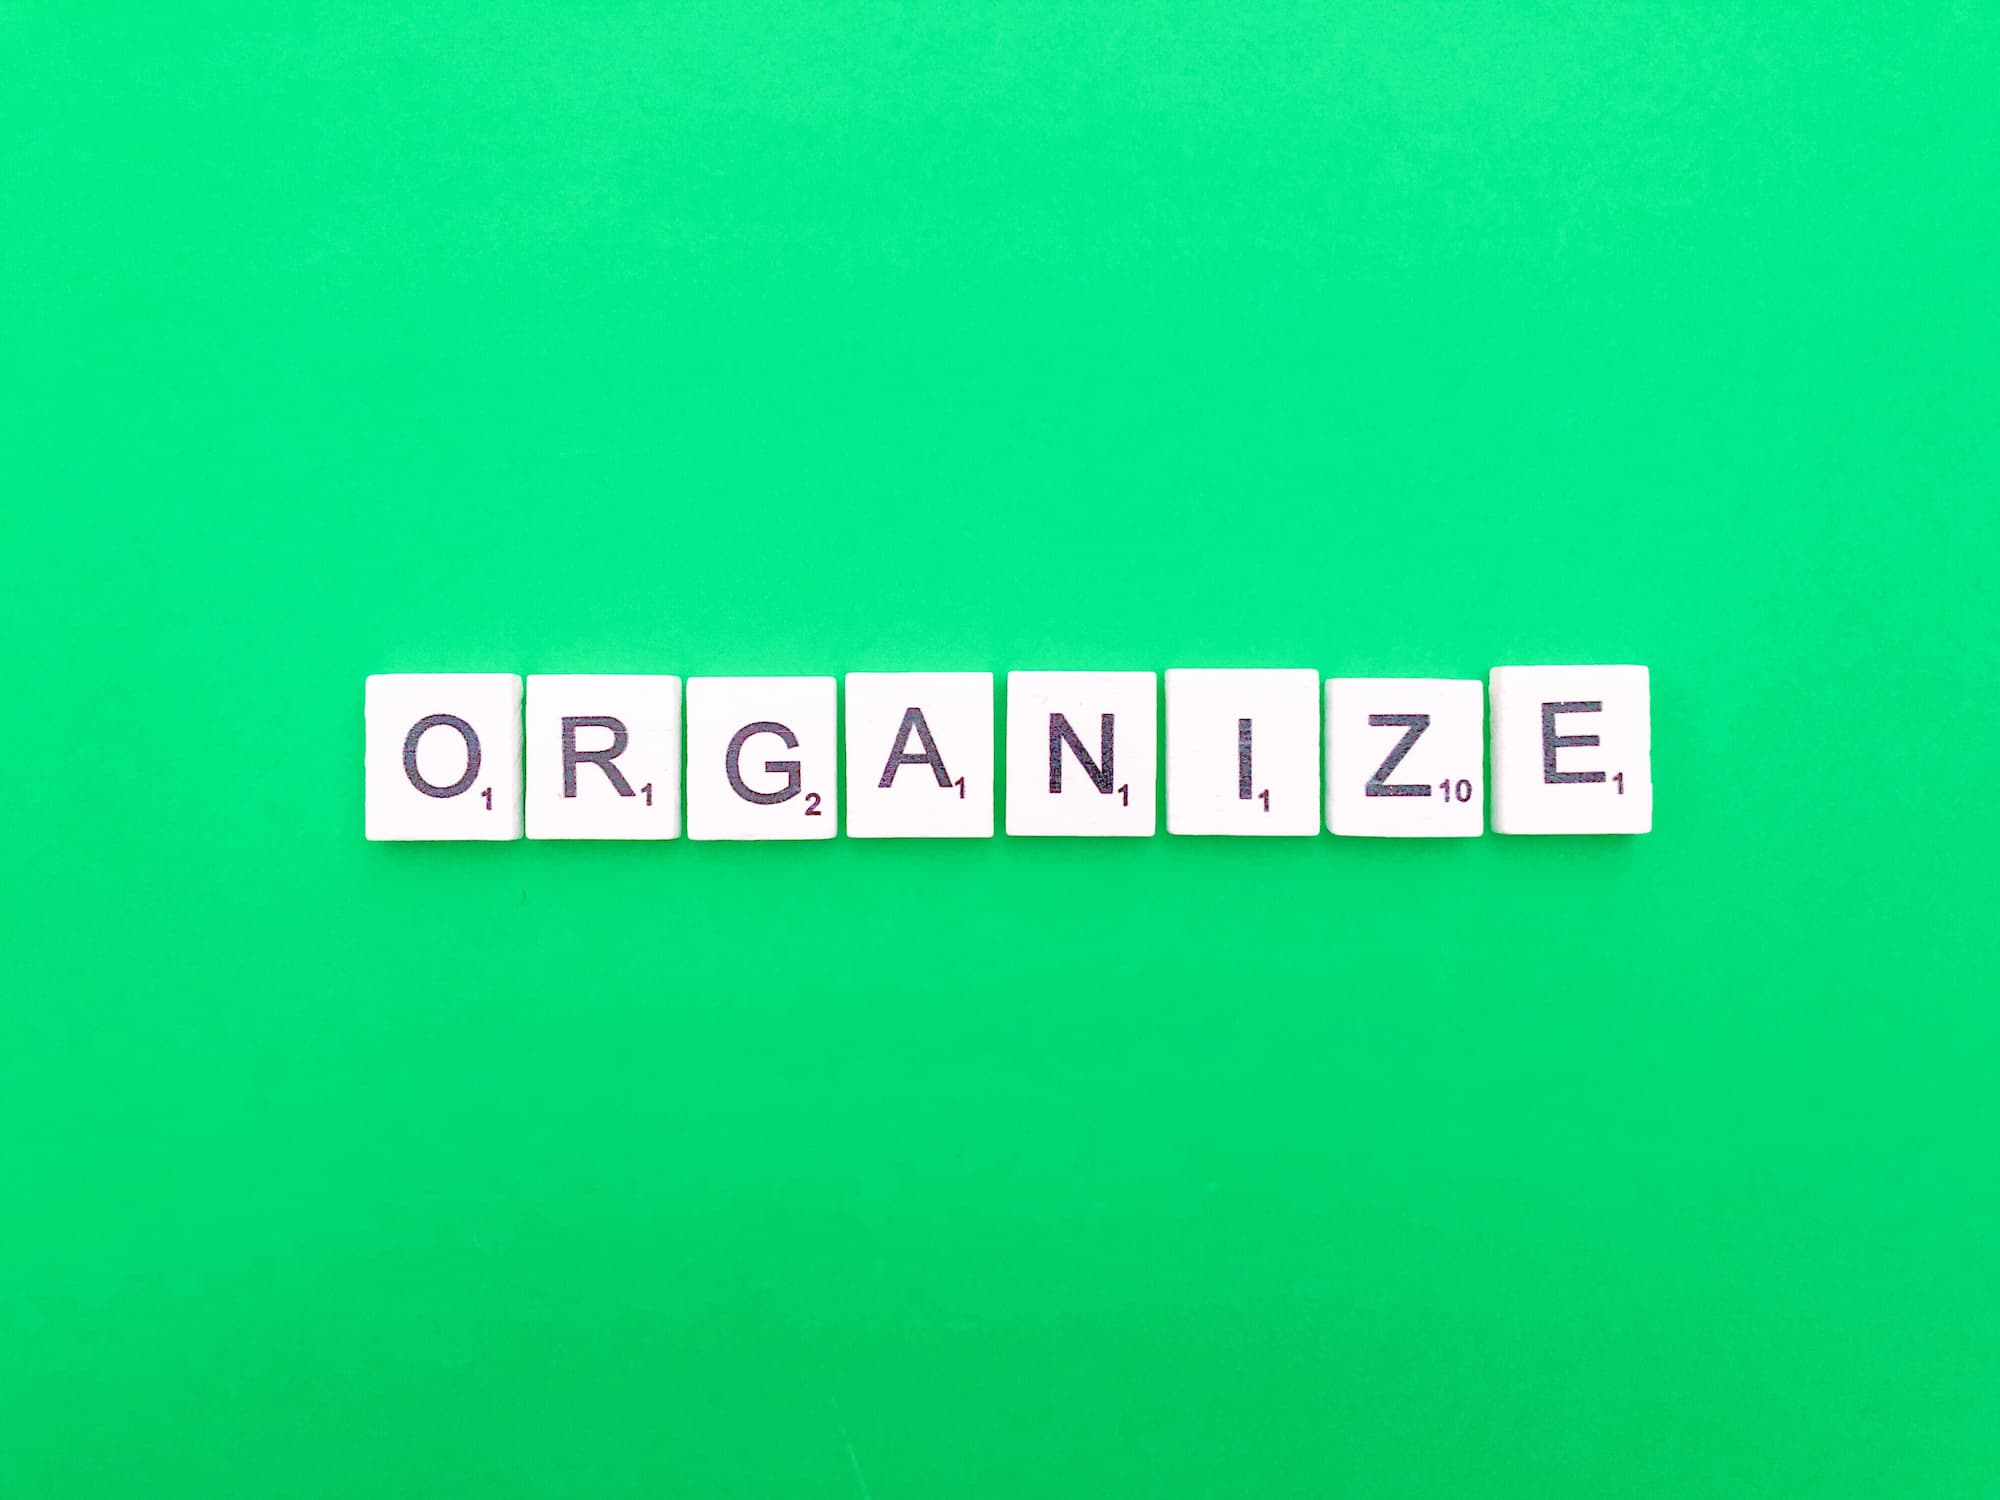 How to Organize Your Home, Business, and Personal Life to Set Yourself Up For Success